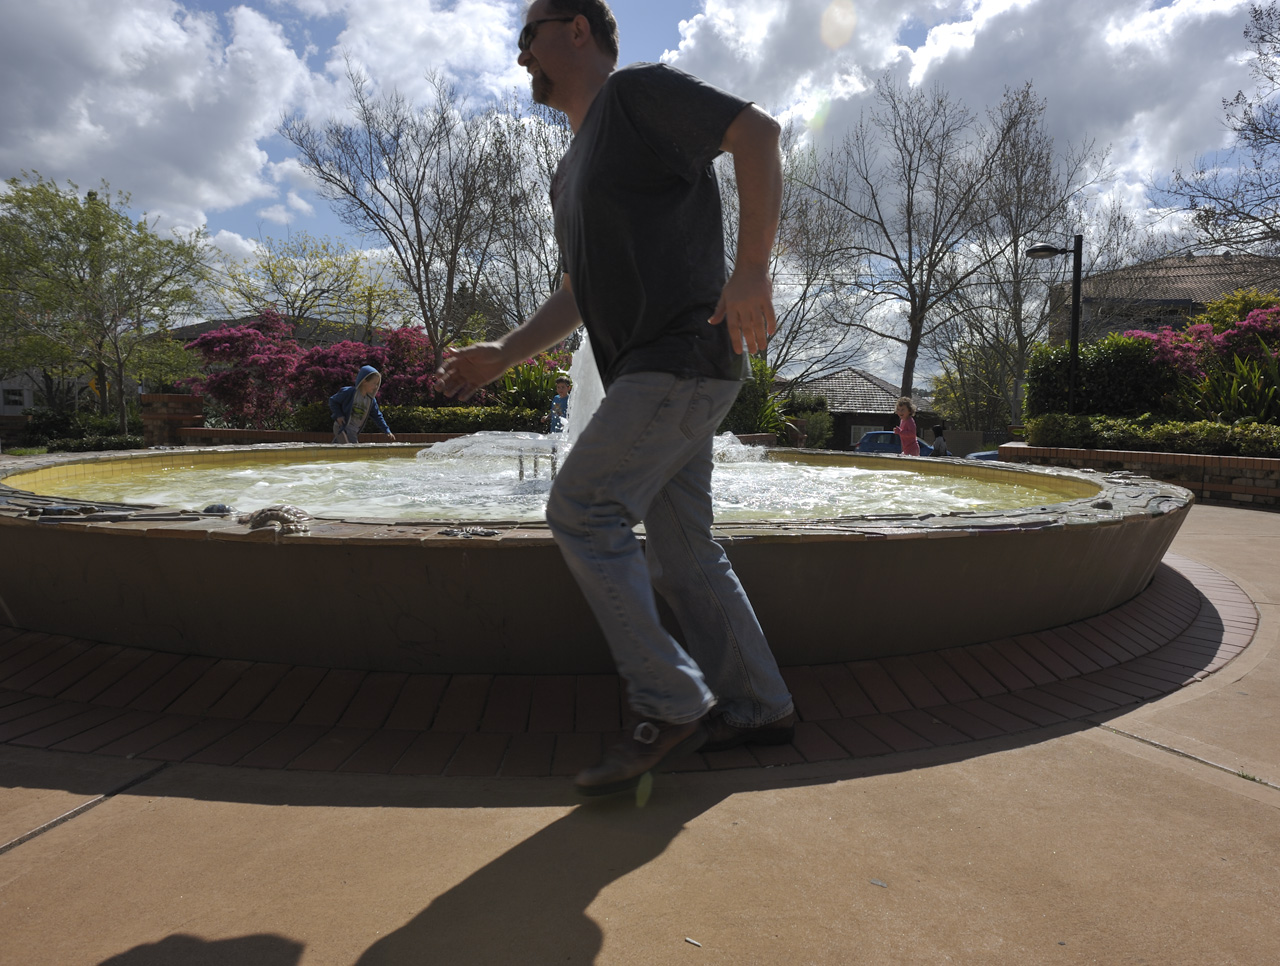 Steve chasing the kids around a water fountain